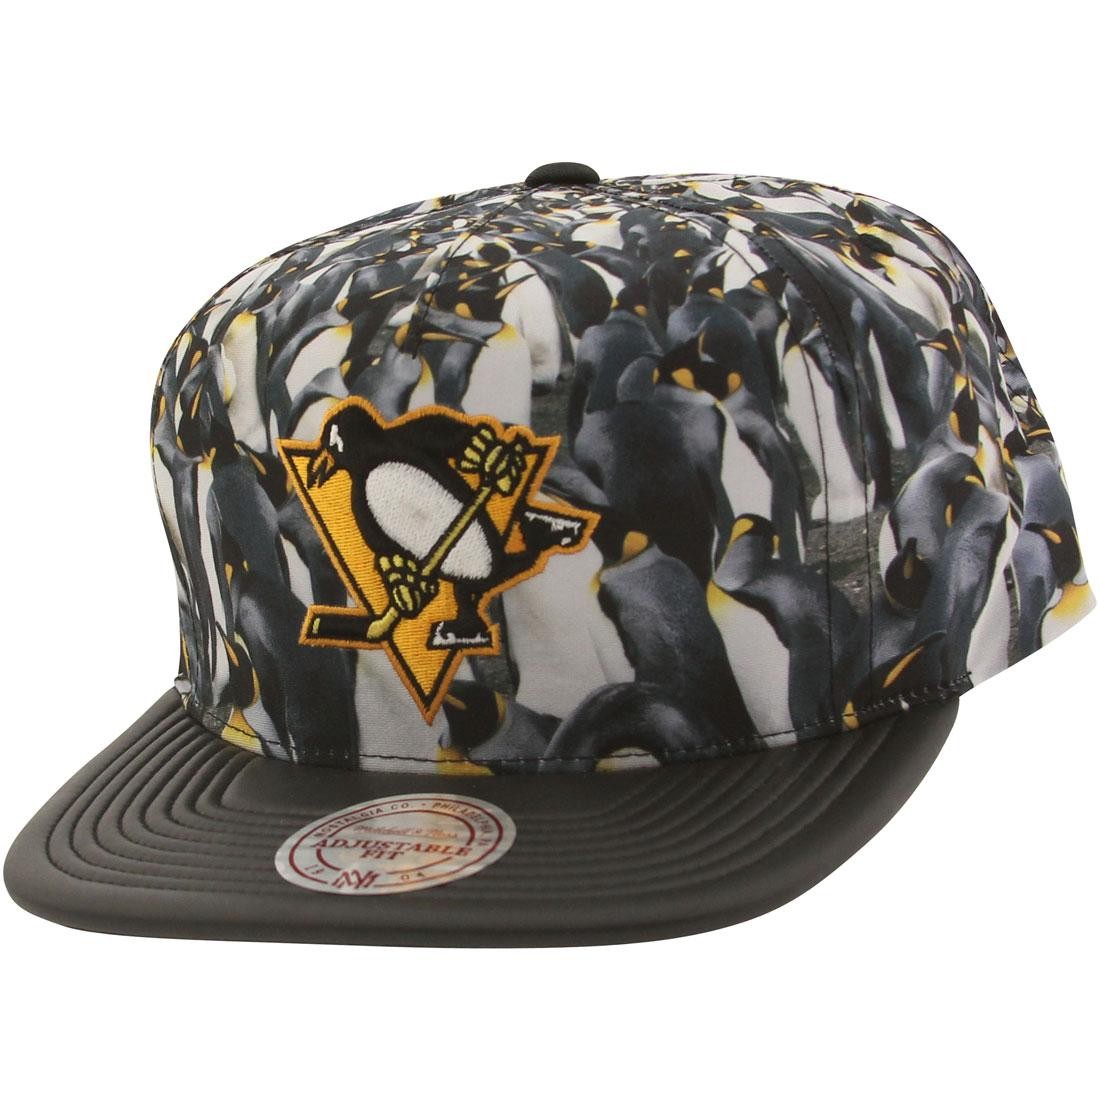 Pittsburgh PENGUINS NHL Intl045 Mitchell & Ness Cap